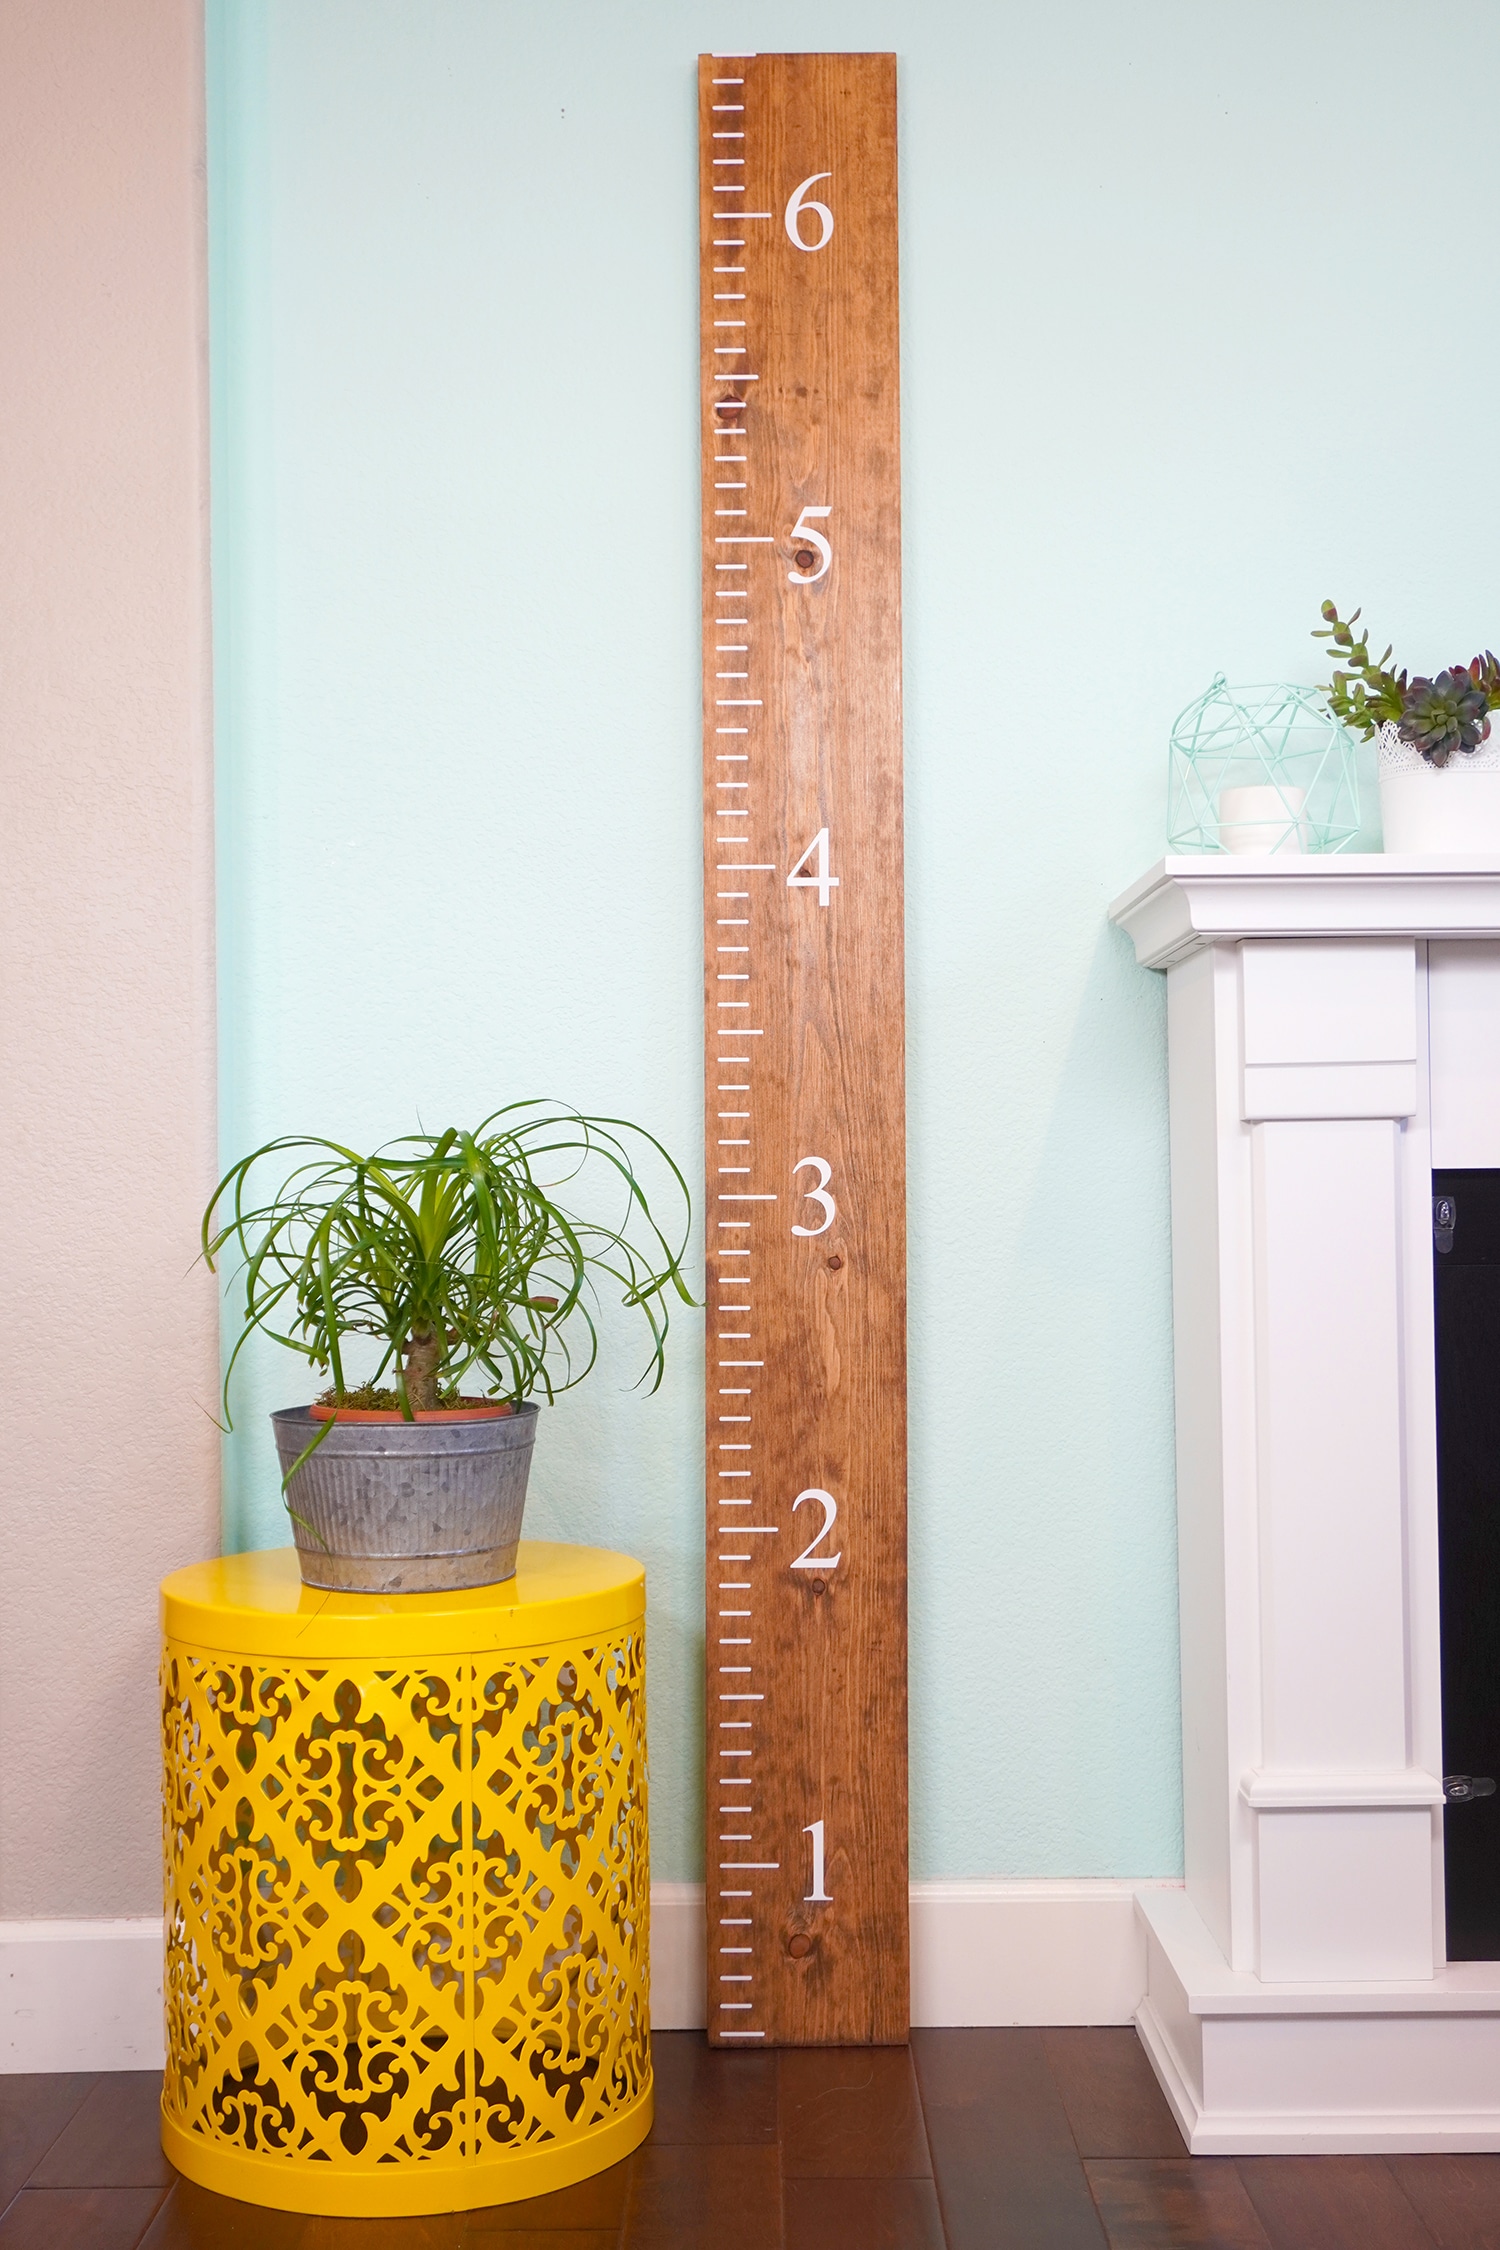 Kids Children Adult Height Growth Chart Measure Wall Hanging Ruler Home  Decor